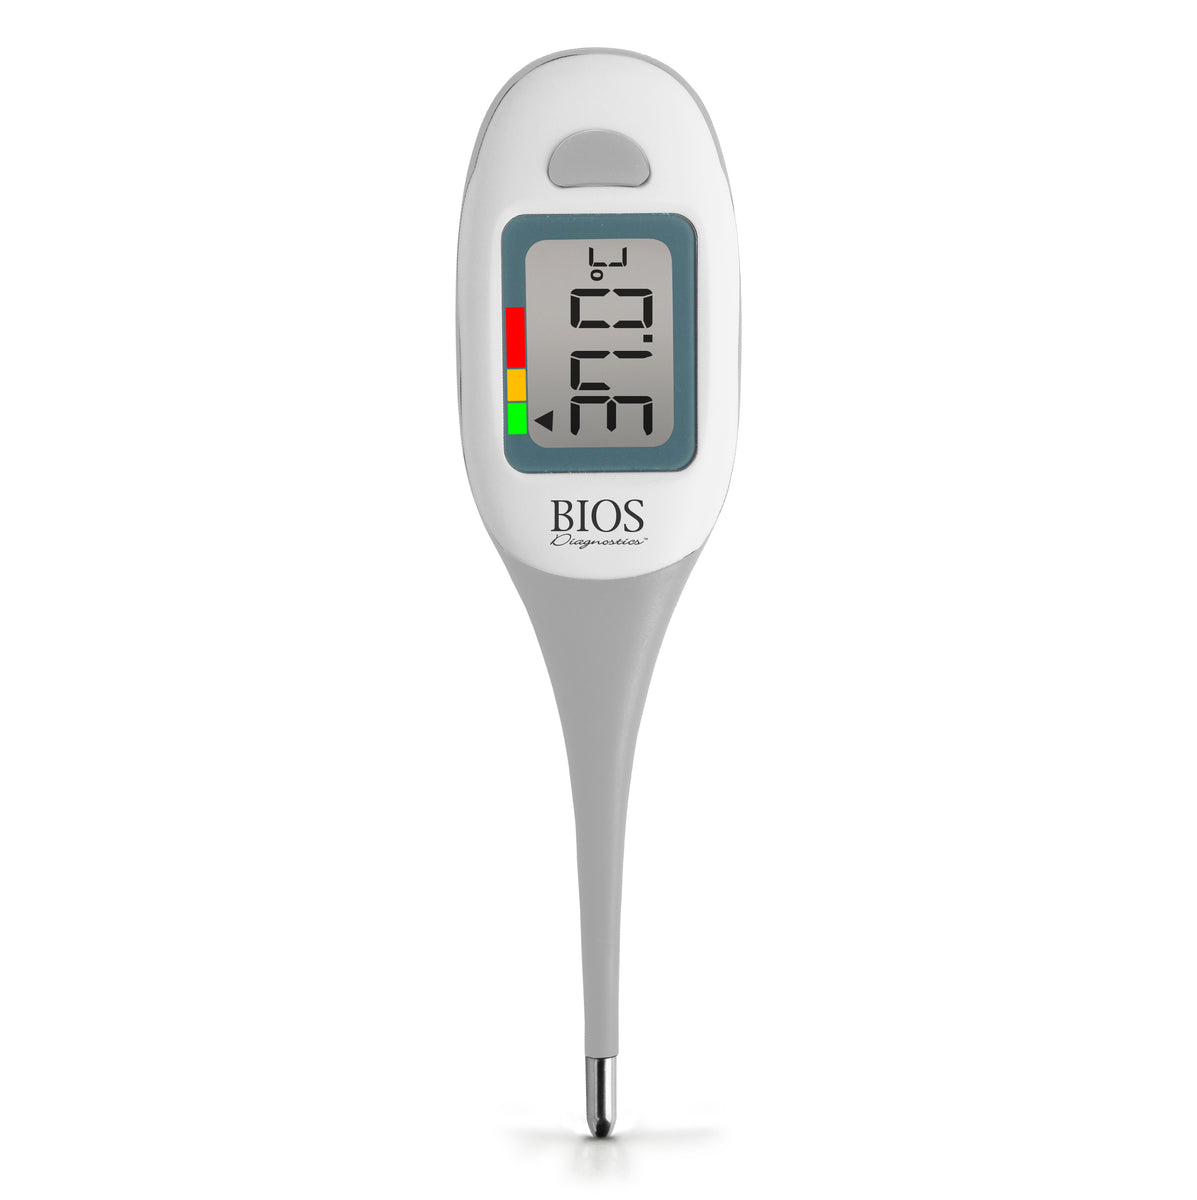 List 99+ Images how to fake a fever on a thermometer Completed